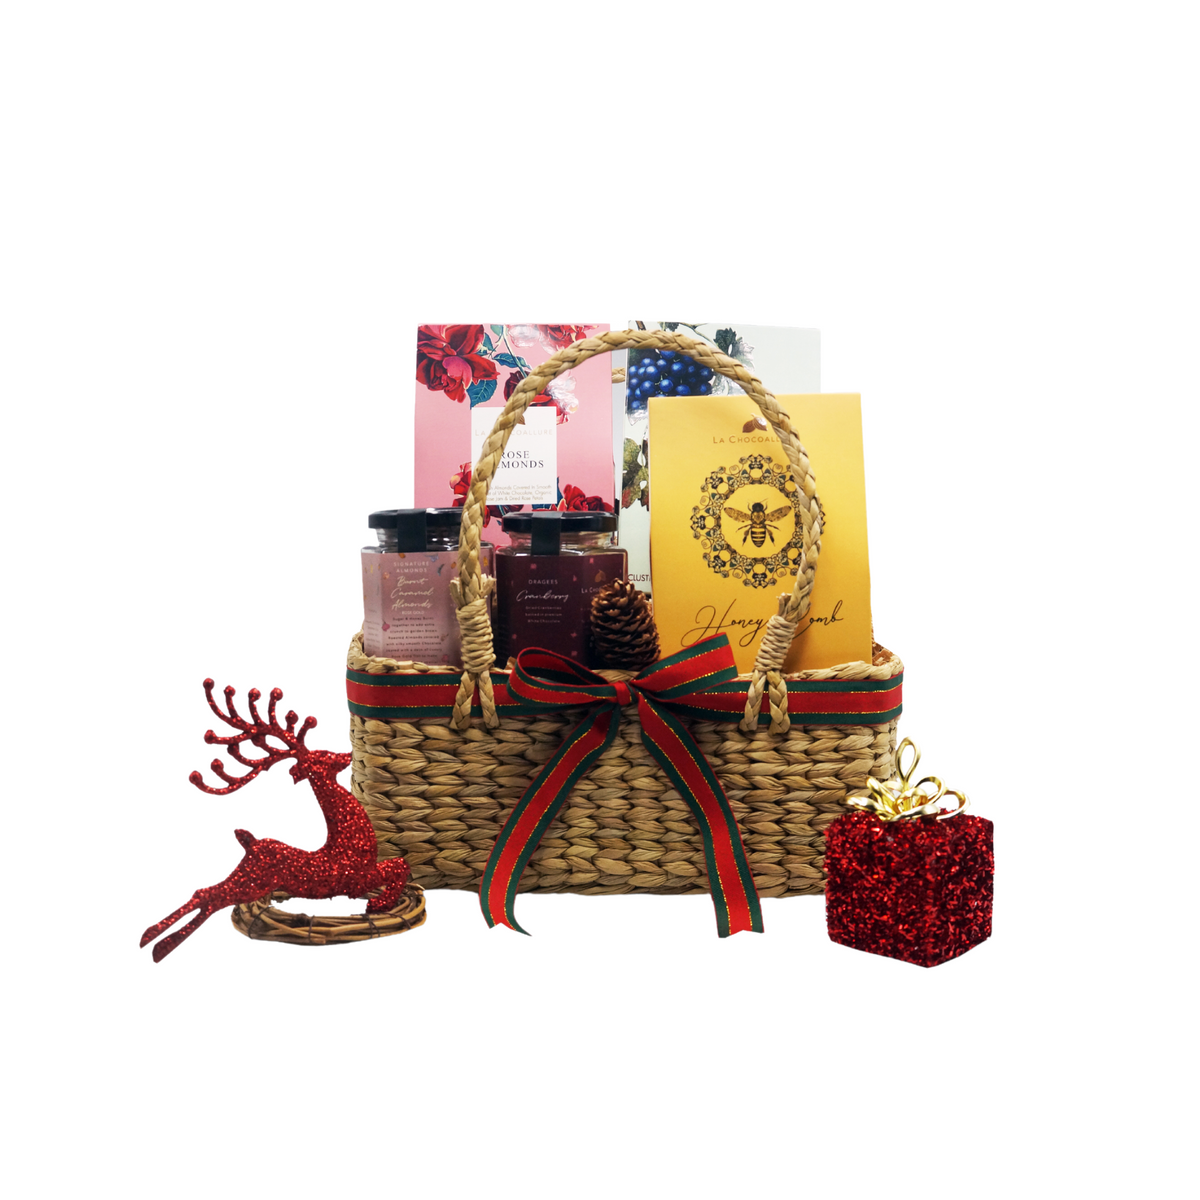 Order Pamper Gift Hamper Basket online at lowest prices in India from  Giftcart.com